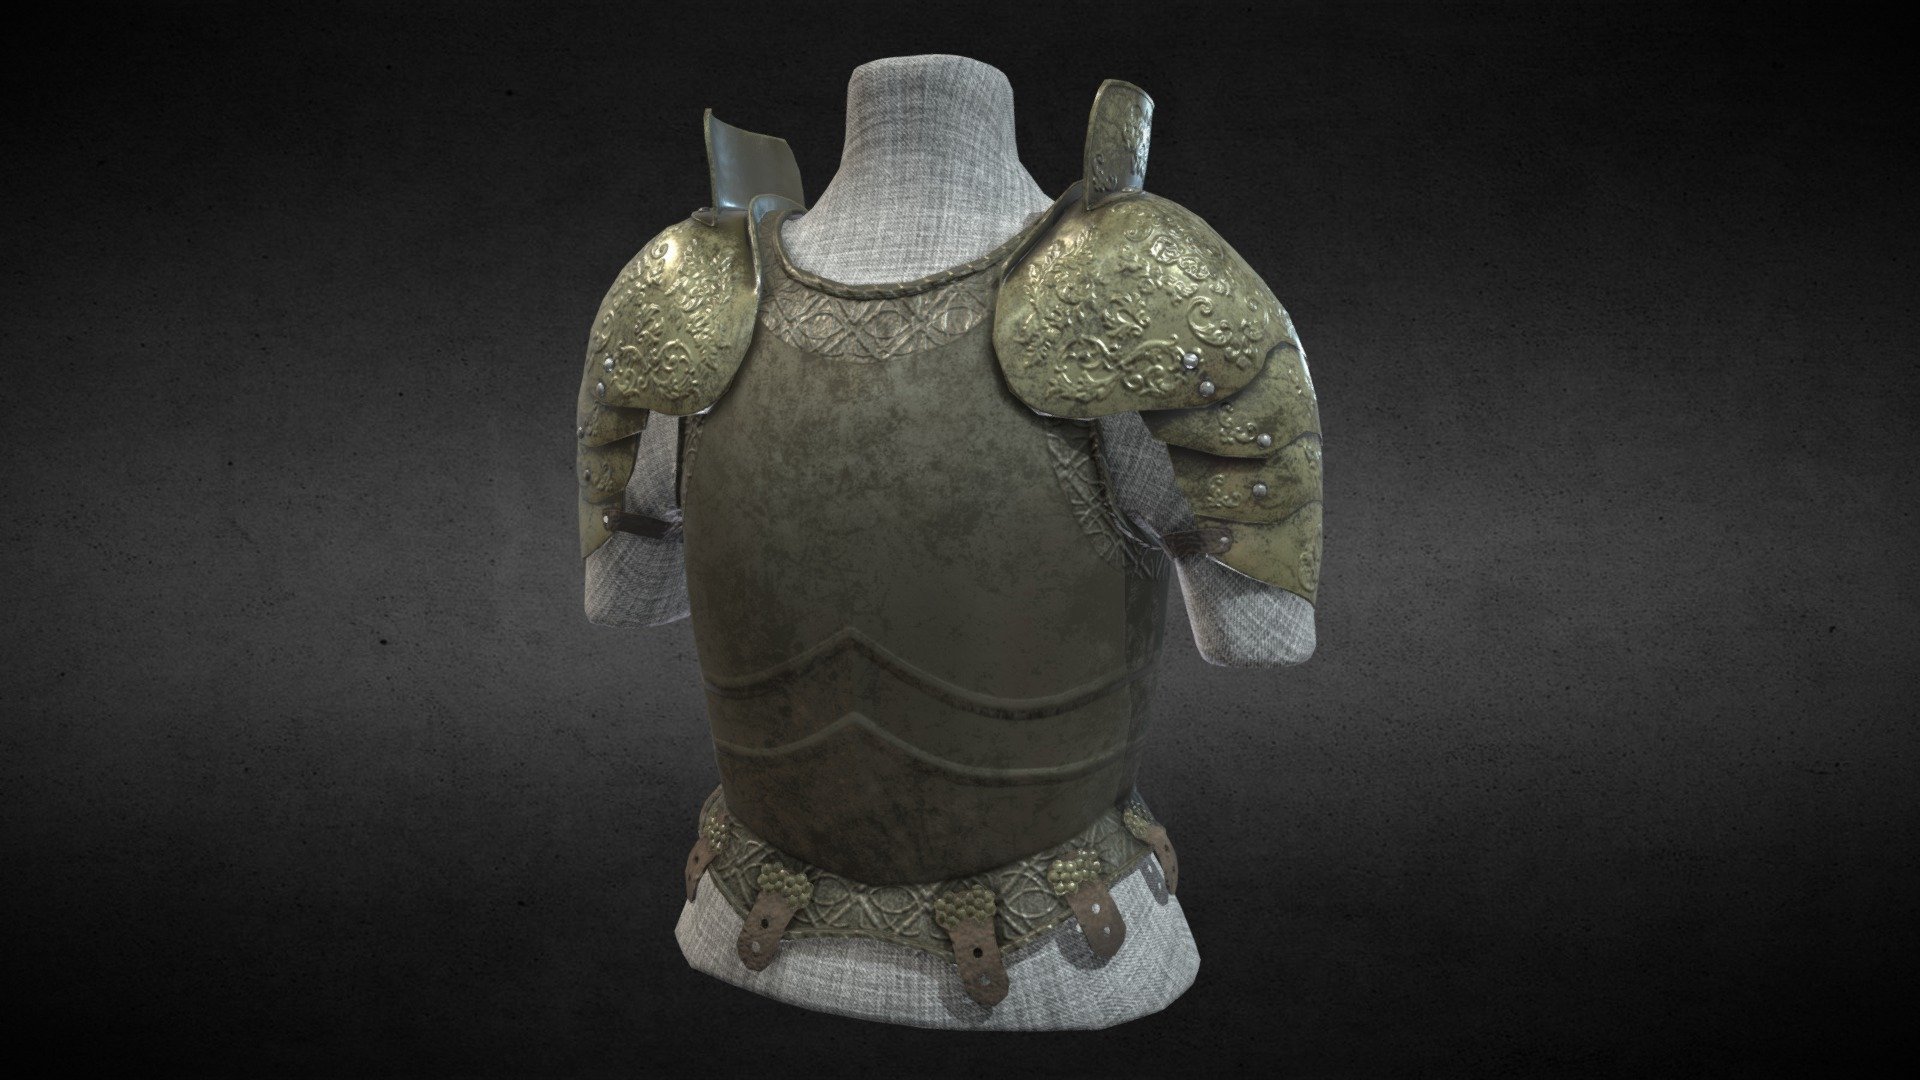 My final product after a month of work developing and improving this prop. Although tough, I enjoyed developing this into what it is now, and I only strive to improve from here on out! - Breastplate - 3D model by hskye831 3d model